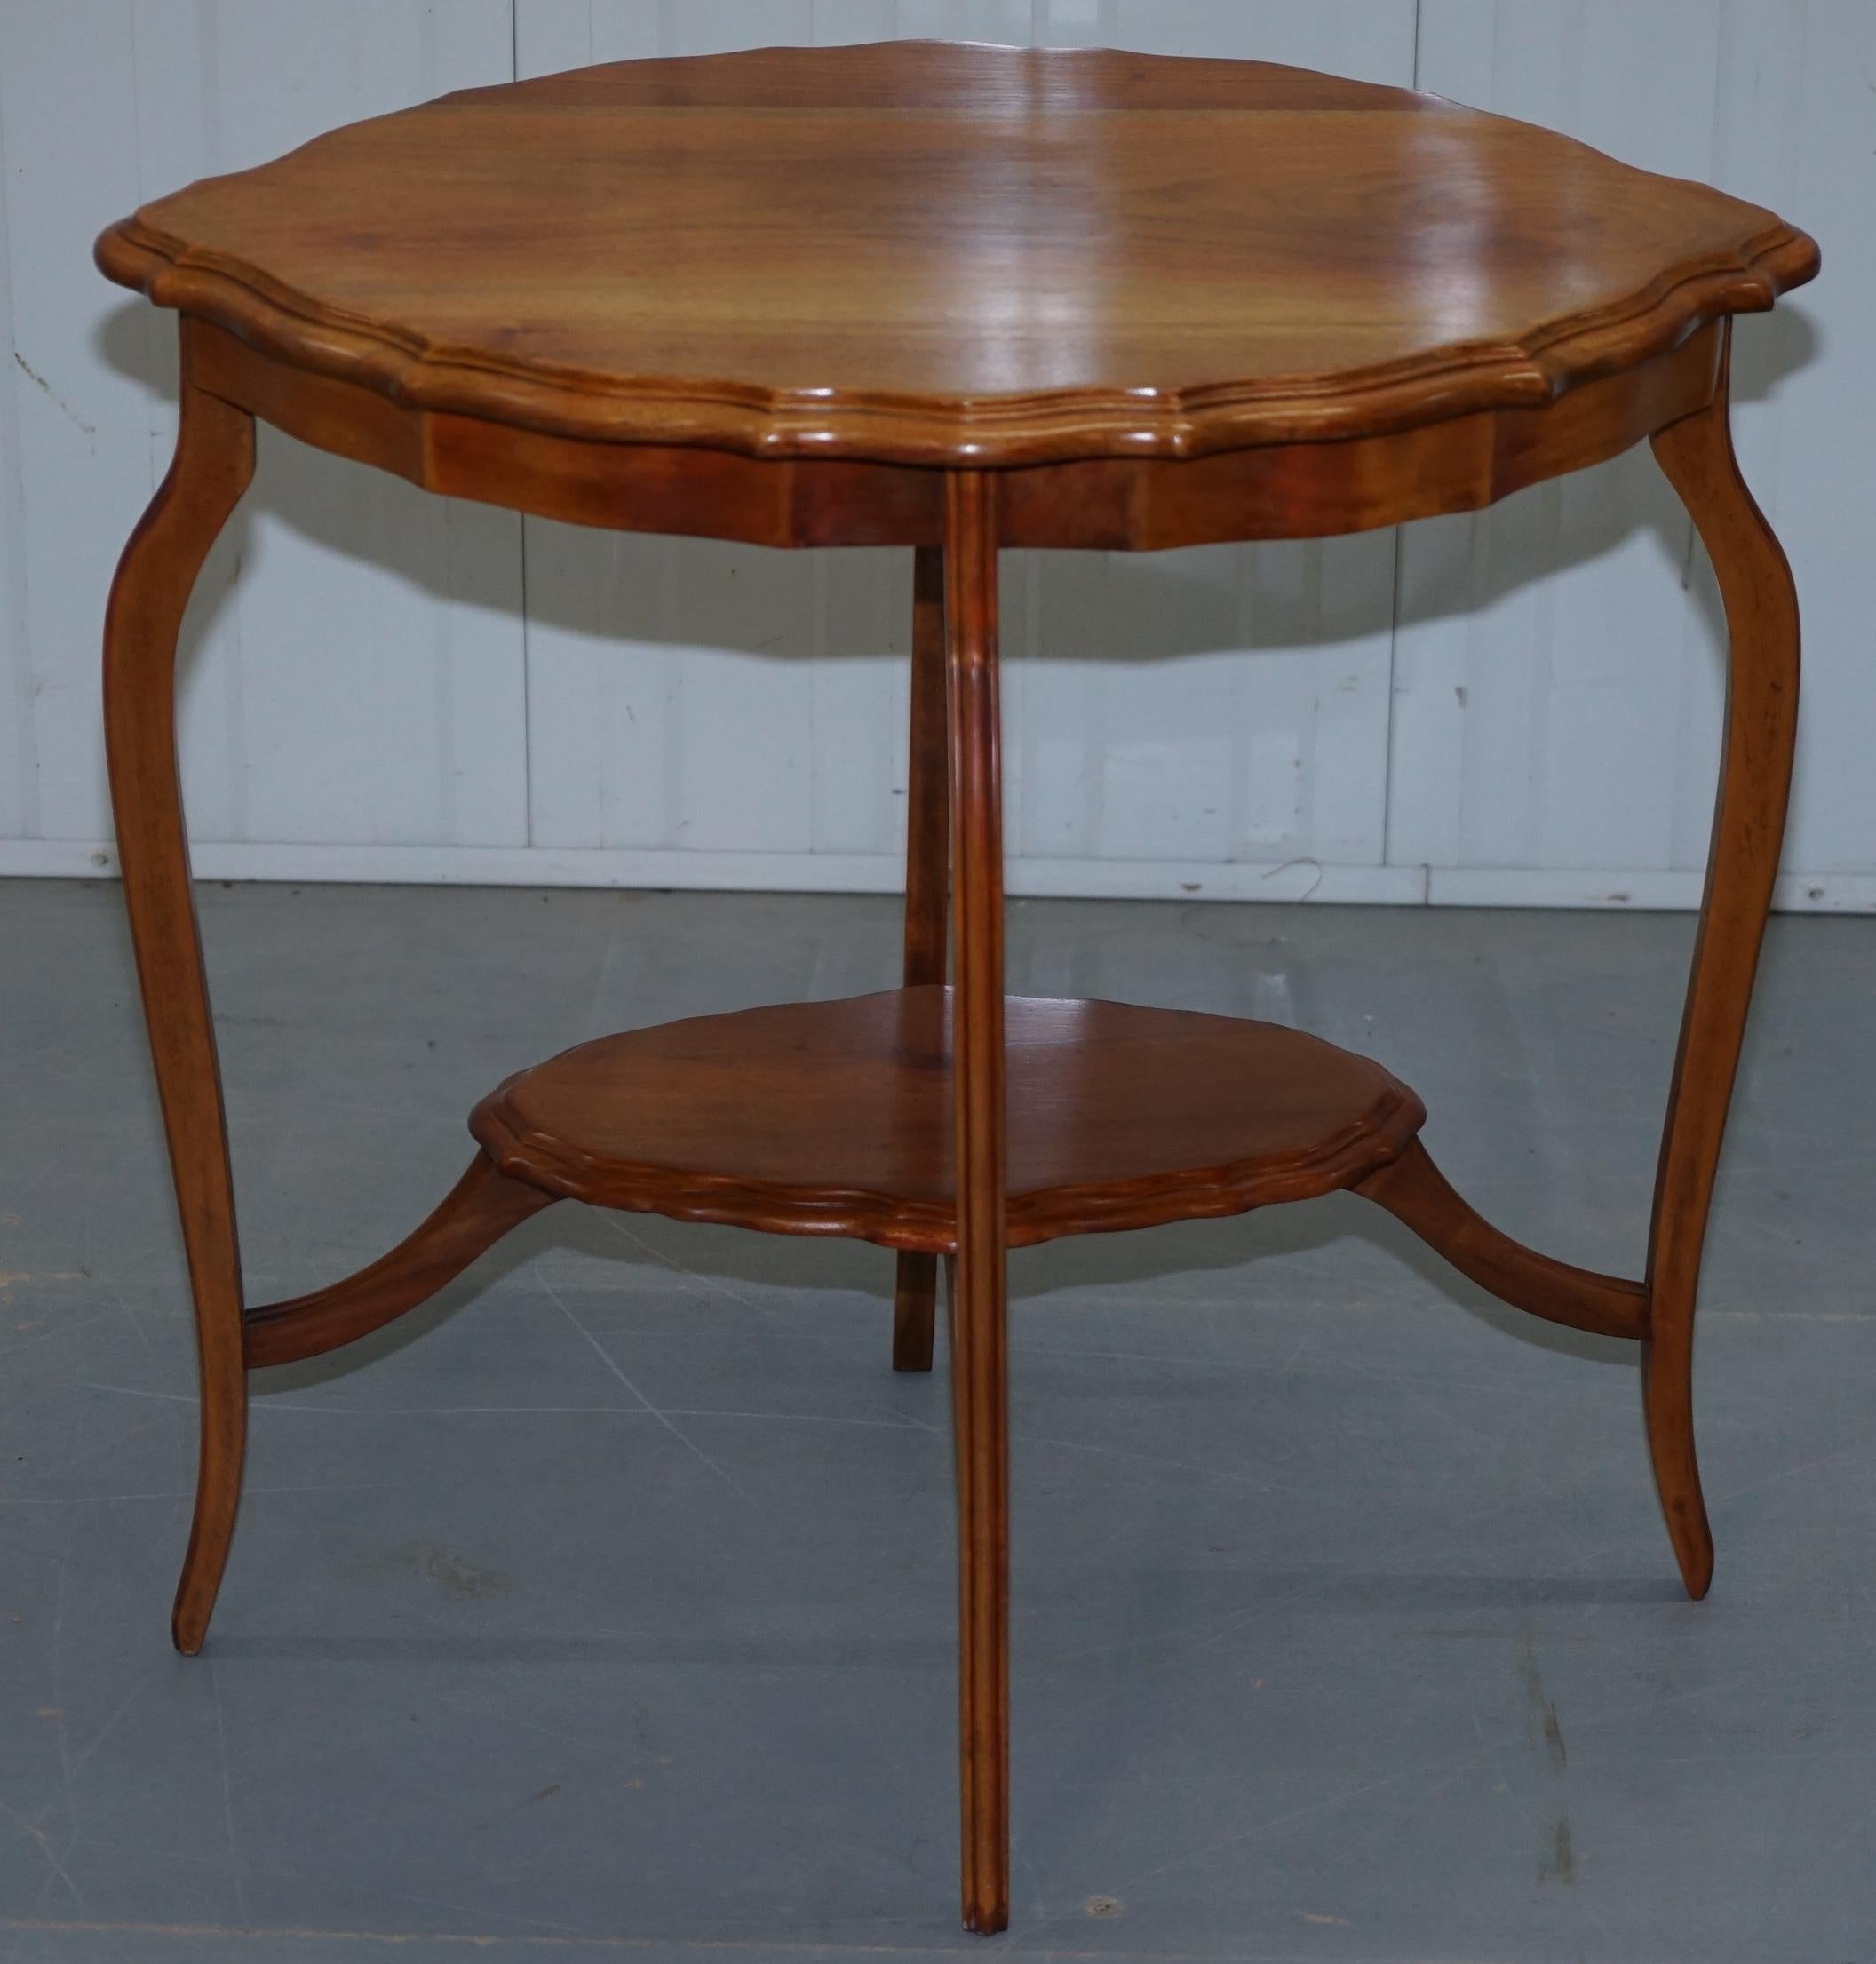 Edwardian Lovely Decorative Satinwood Occasional Centre Table Scalloped Edge Ornate Legs For Sale